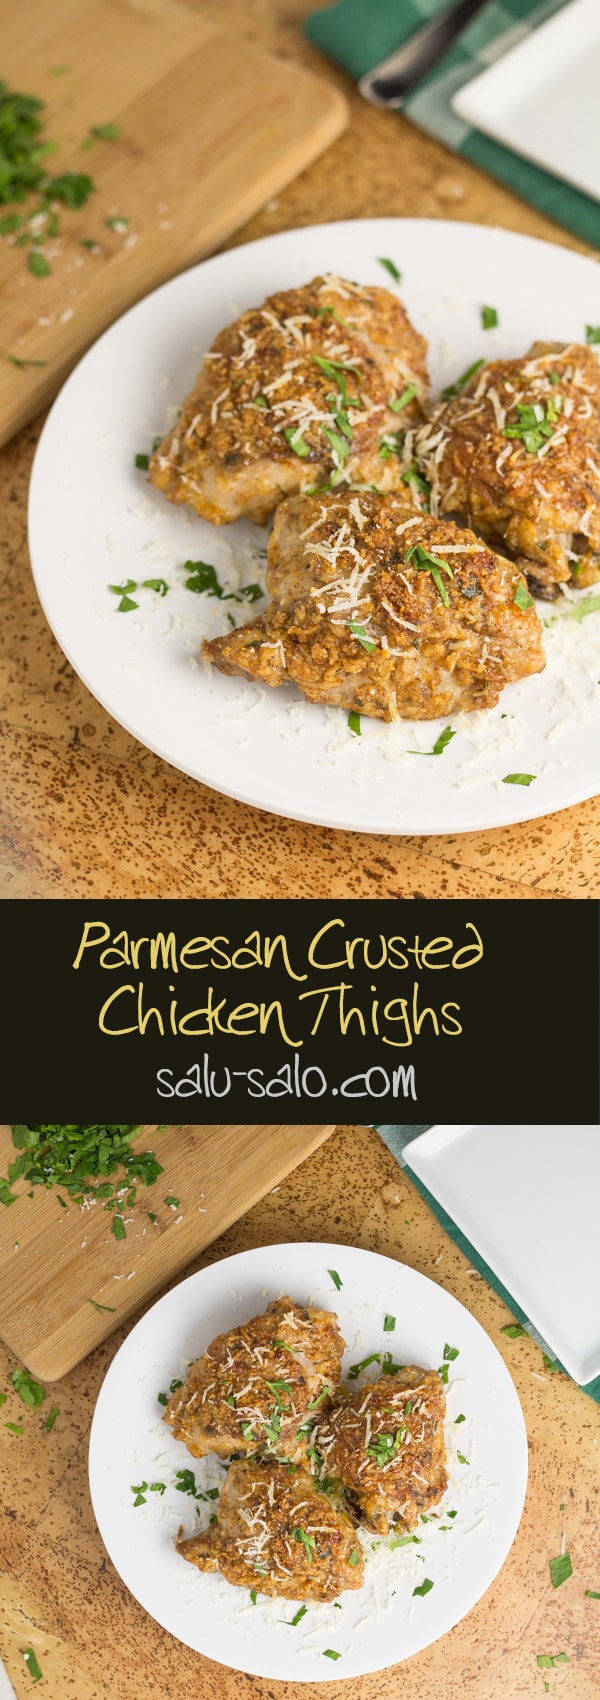 Parmesan Crusted Chicken Thighs